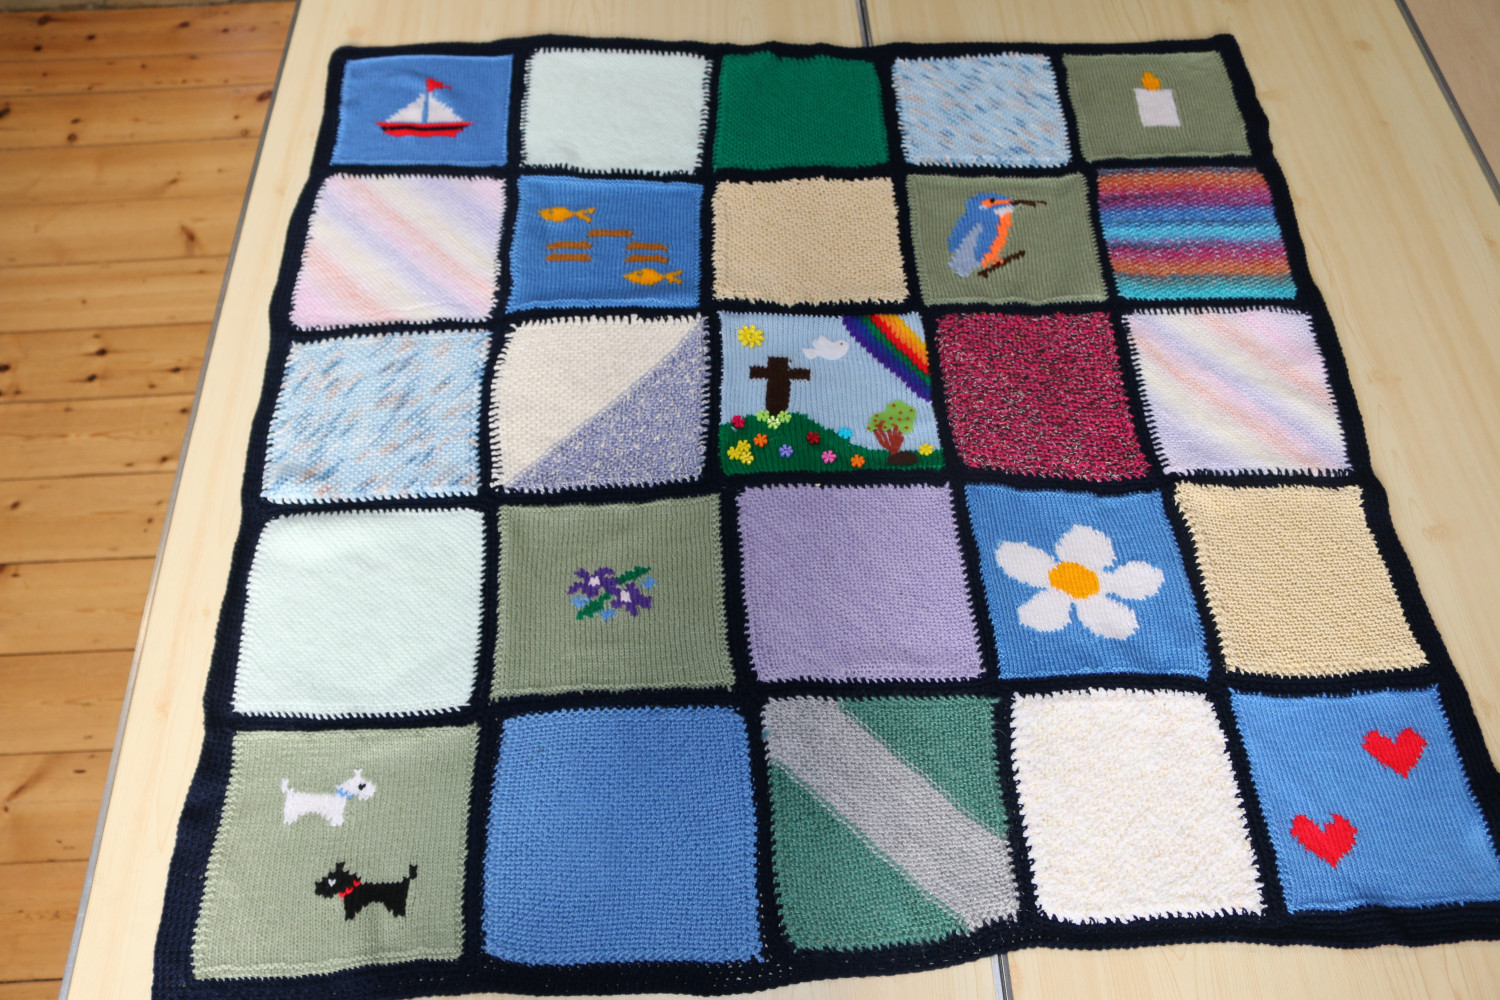 Knitted quilt made of 25 knitted squares